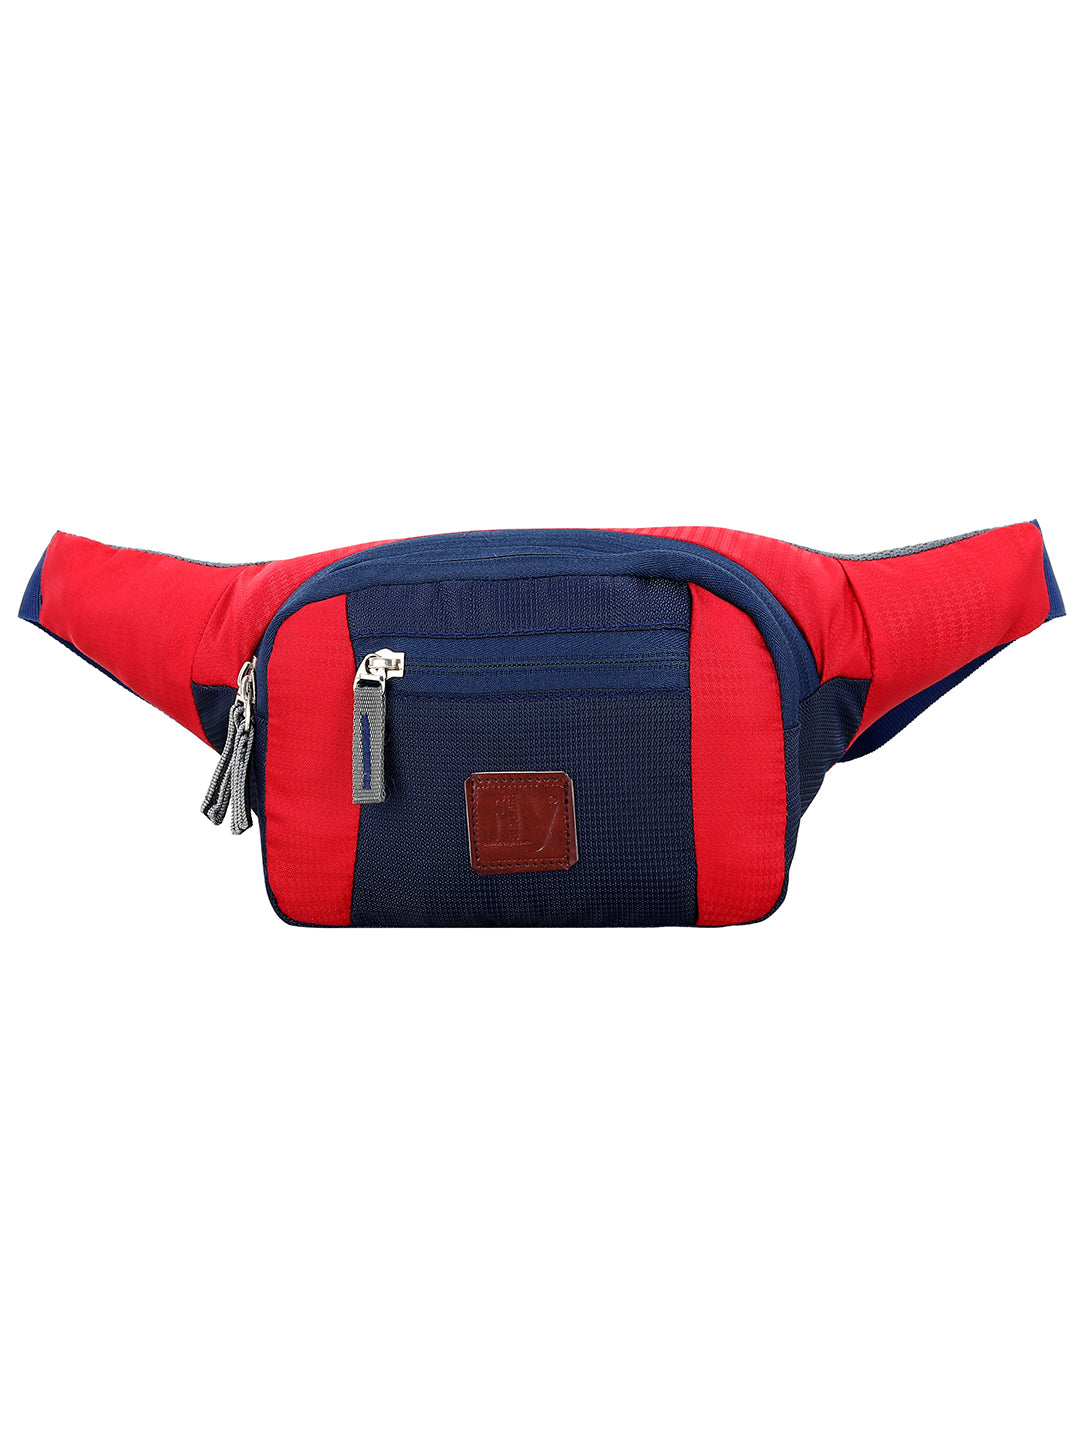 Fly Fashion Travel Waist Pouch Crossbody Travel Pouch for Men and Women